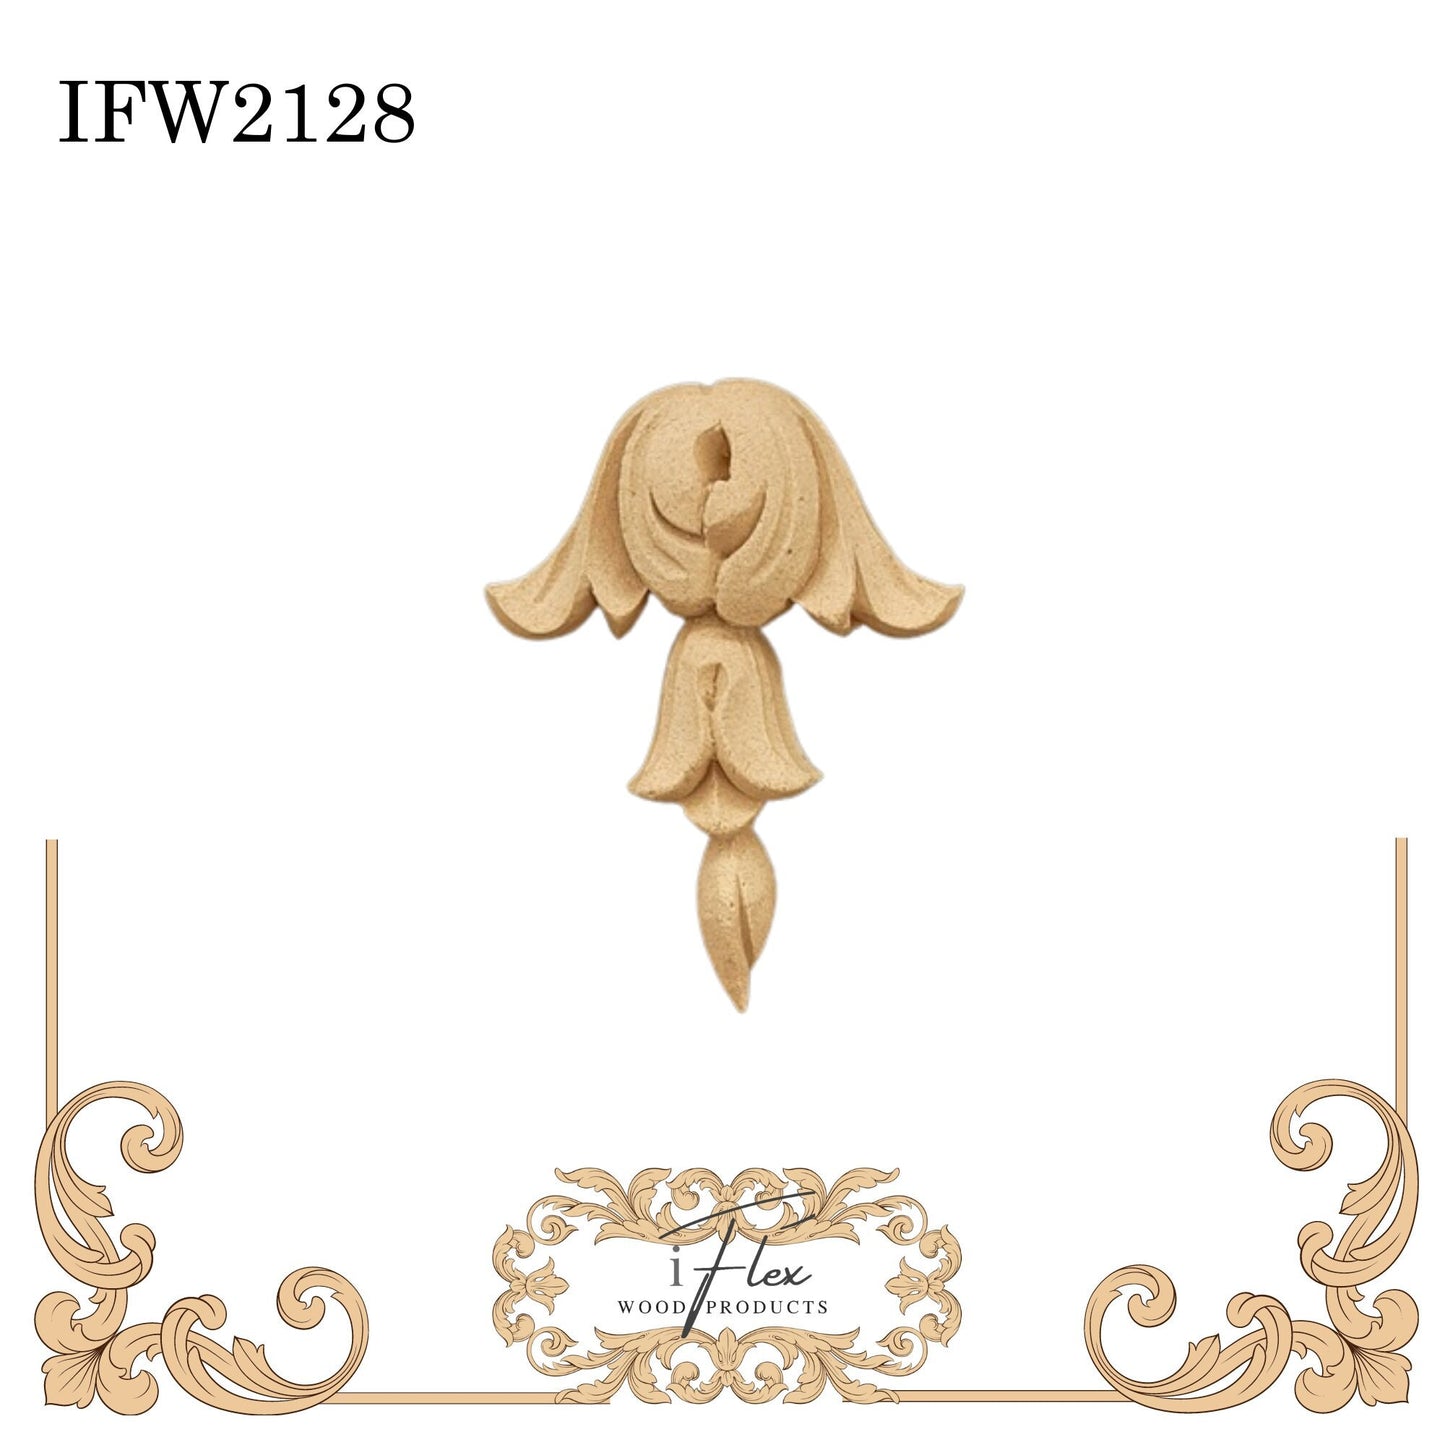 IFW 2128 iFlex Wood Products, bendable mouldings, flexible, wooden appliques, drop